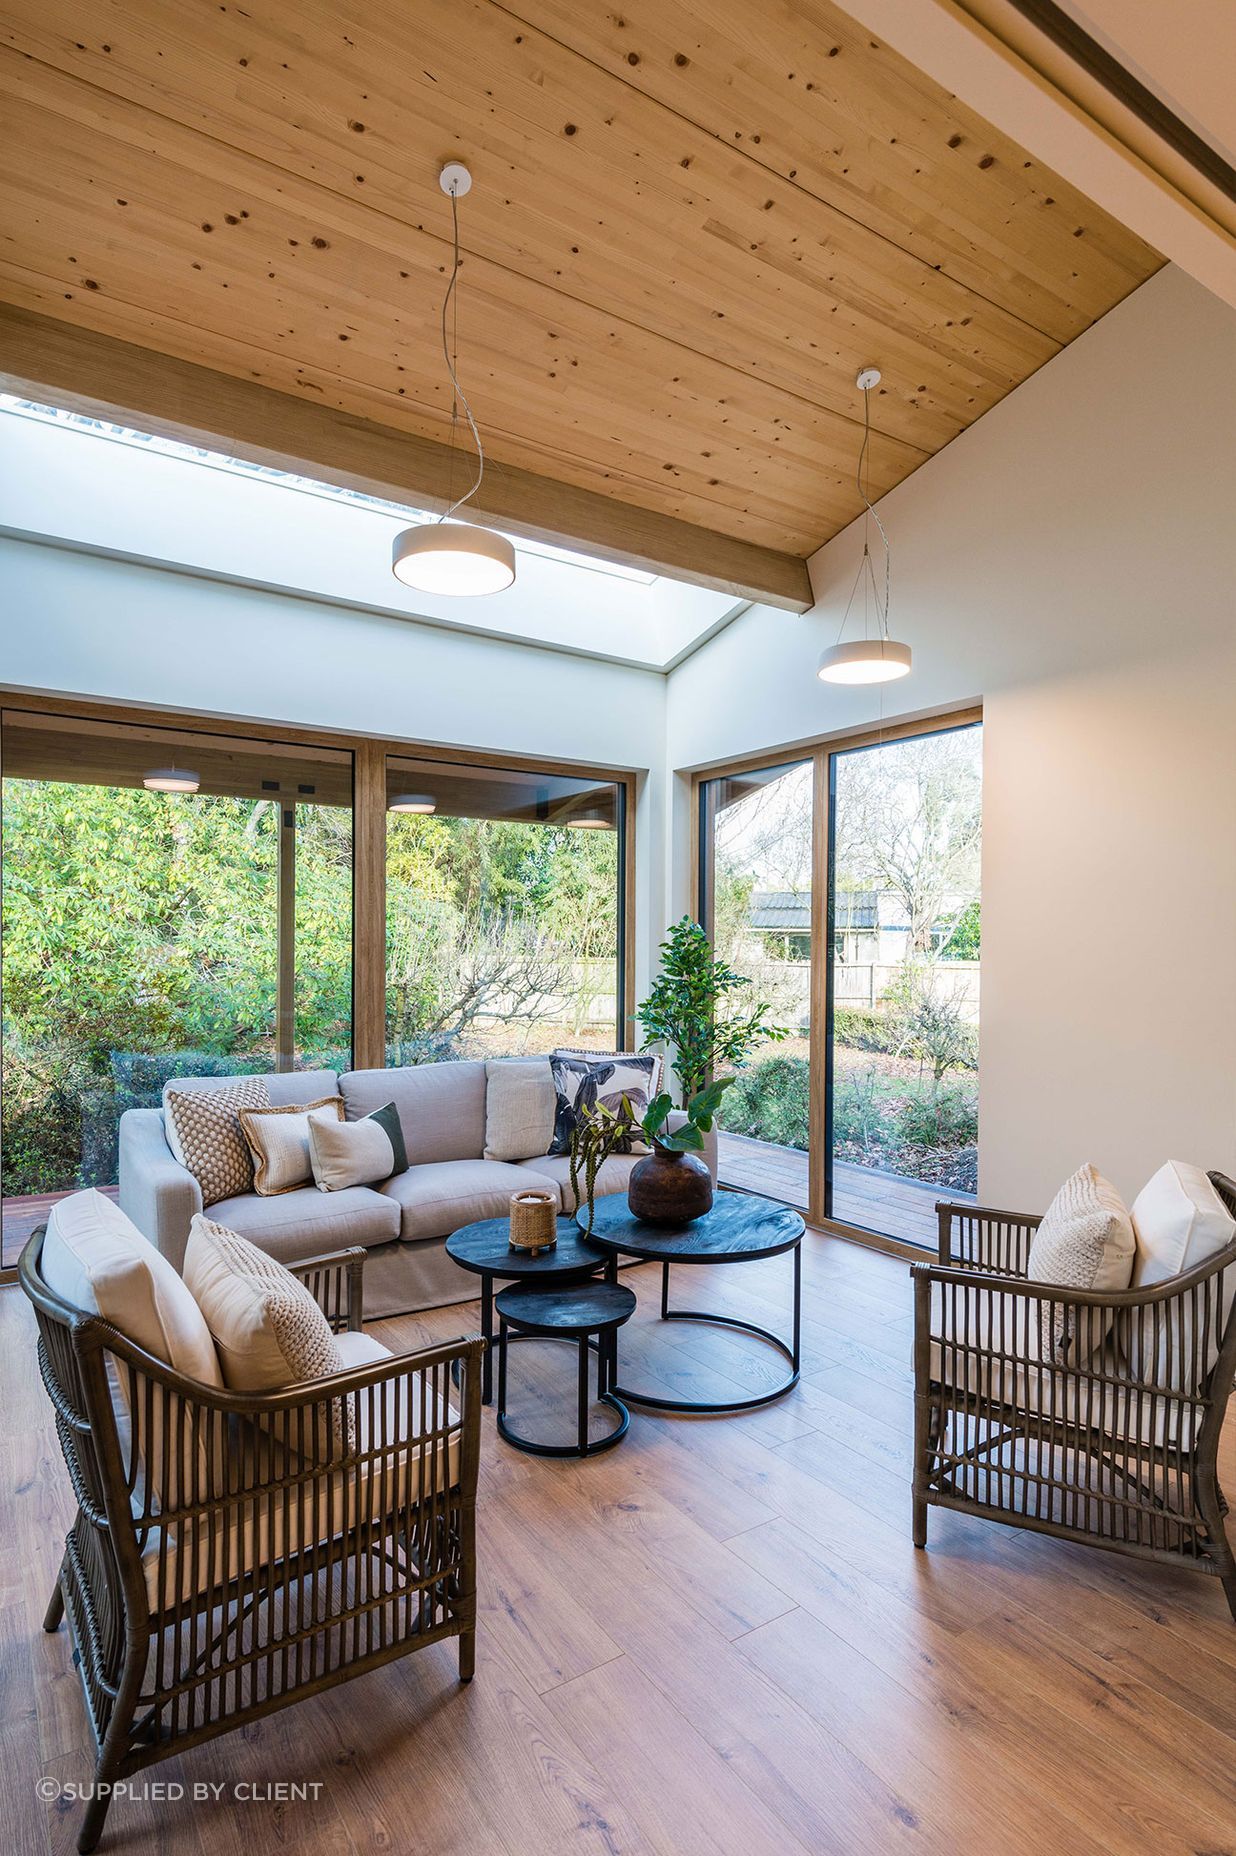 The sunroom has glazing on three sides and a 3.5-metre skylight.